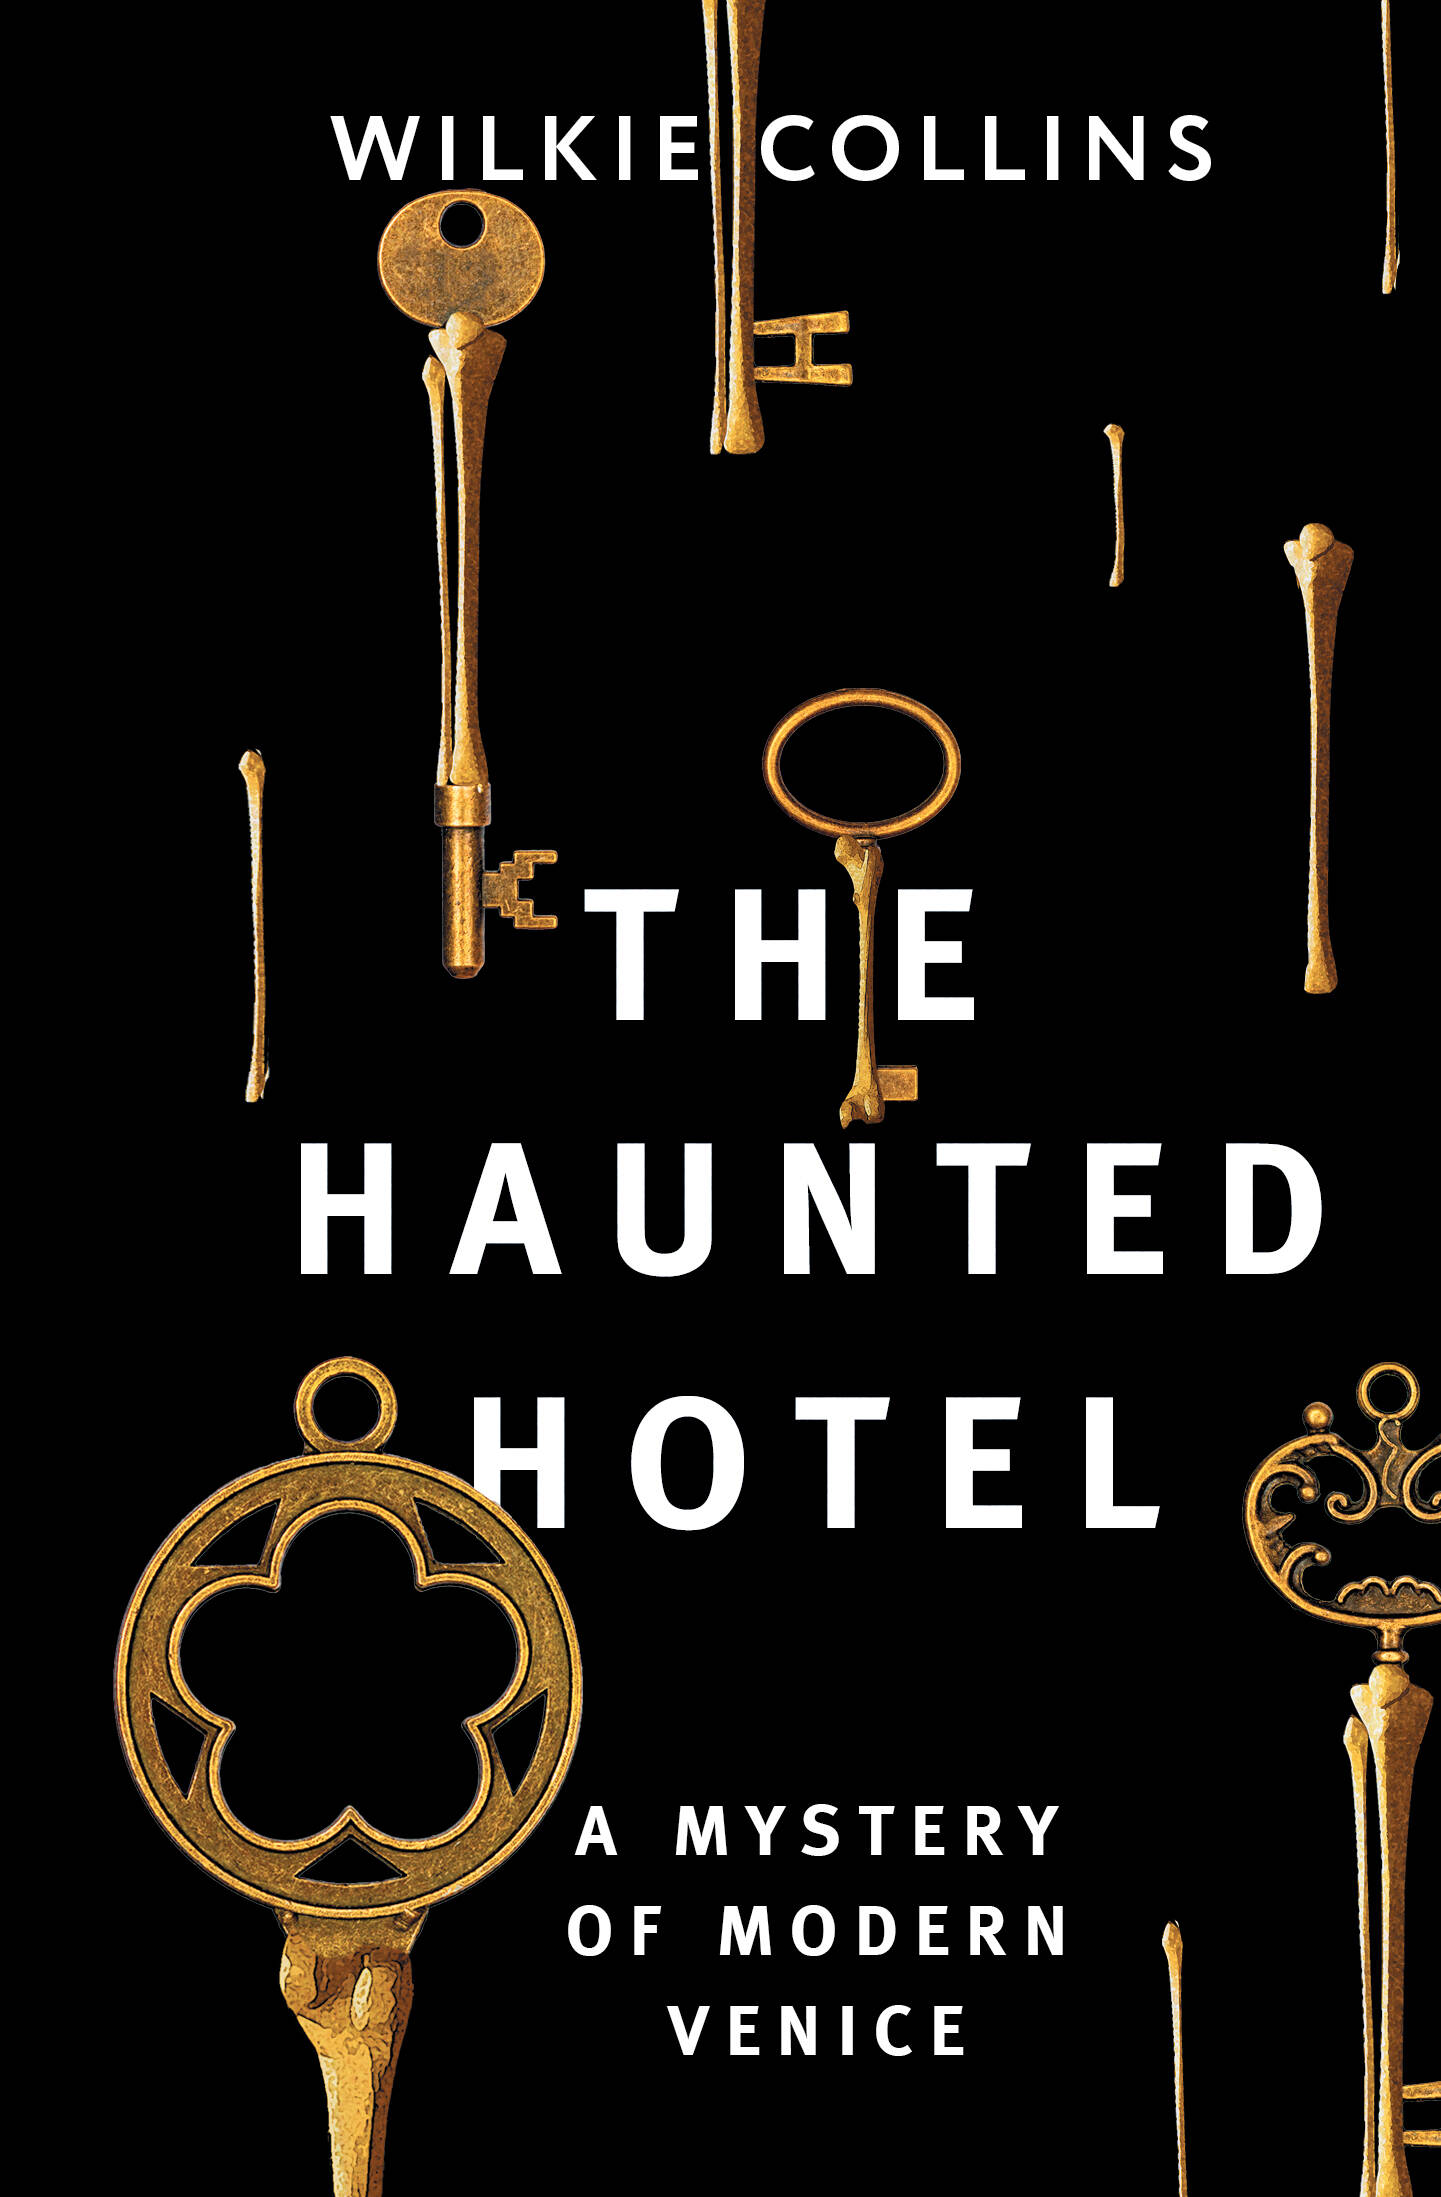 collins w the haunted hotel Collins Wilkie The Haunted Hotel: A Mystery of Modern Venice